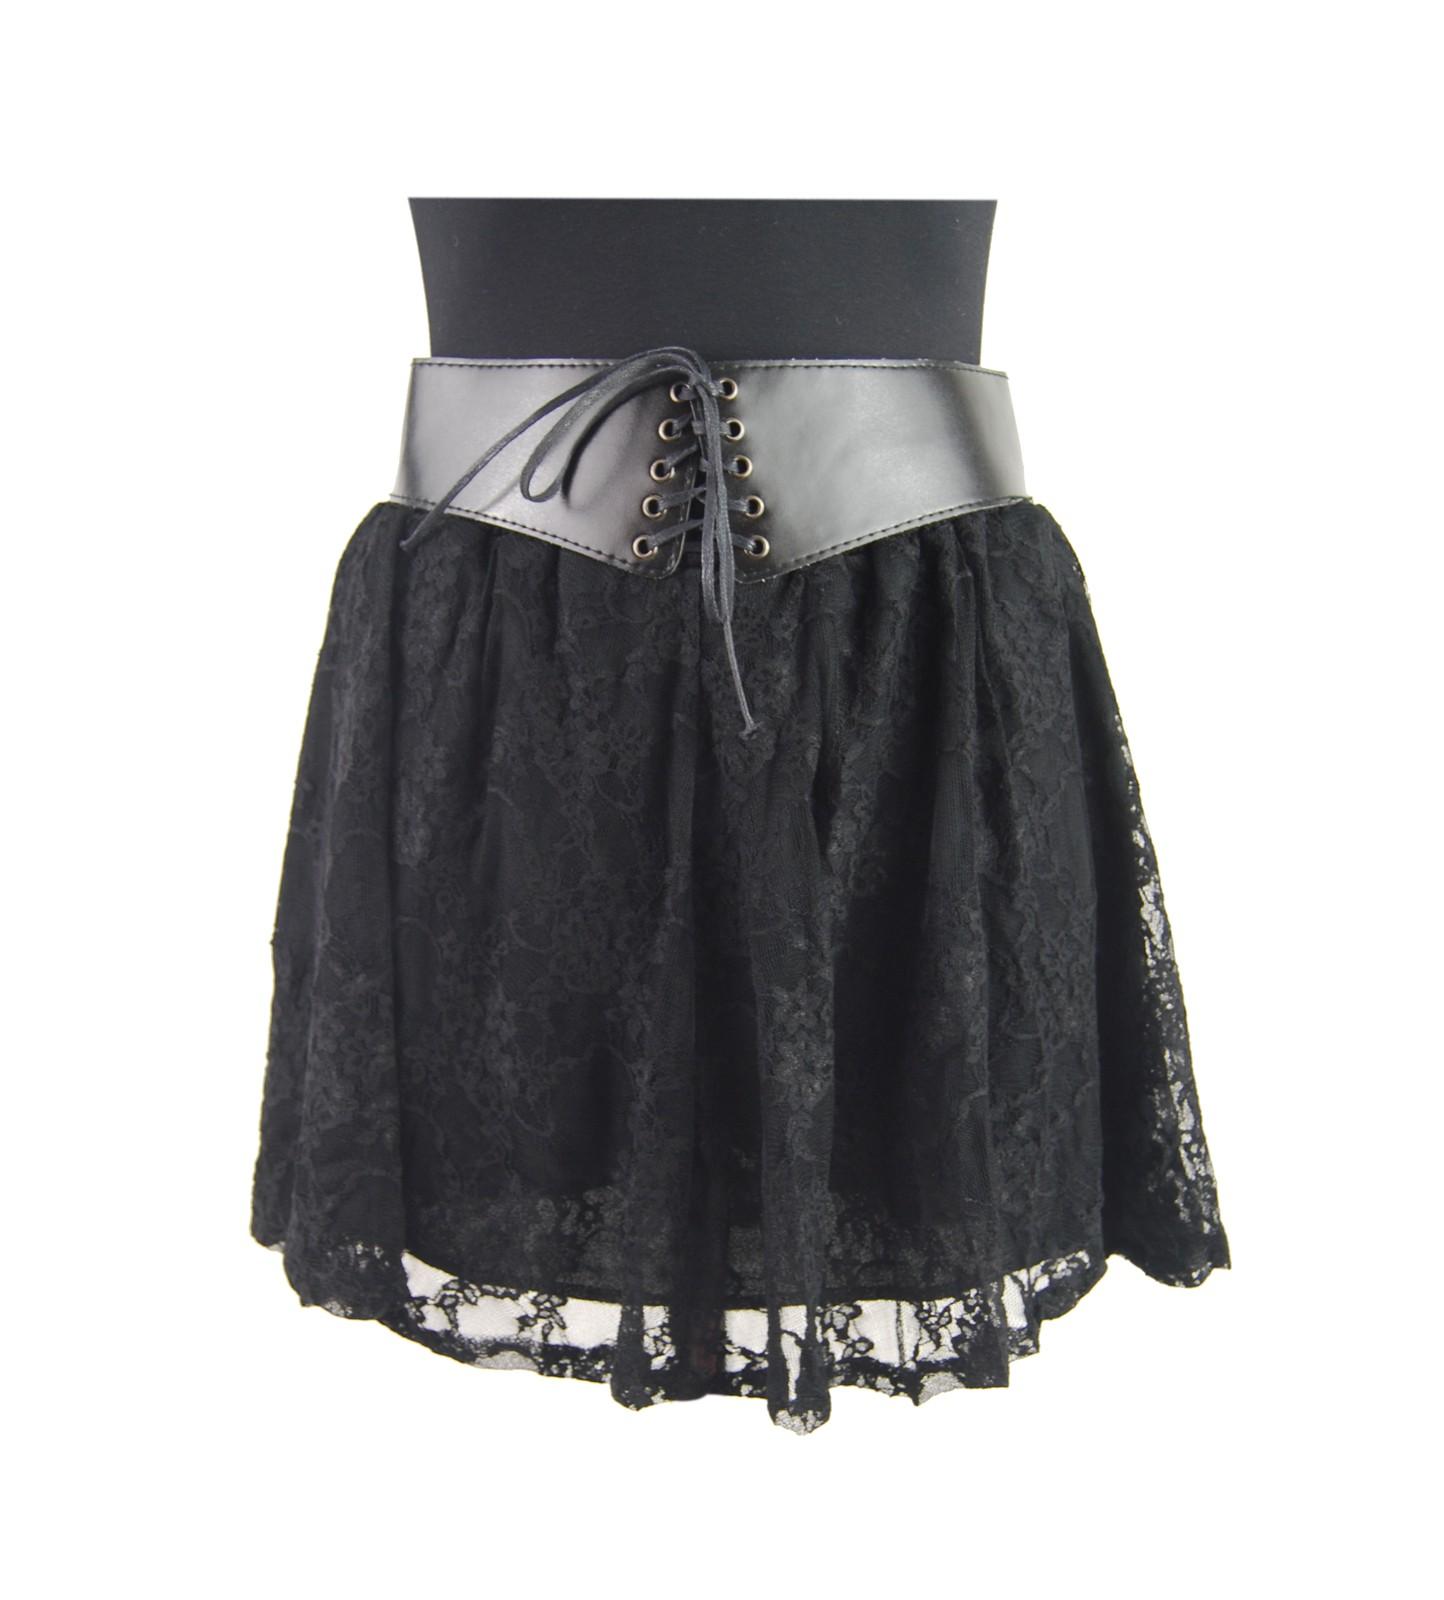 1001 fashion trends: Lace skirts | Tulle skirts